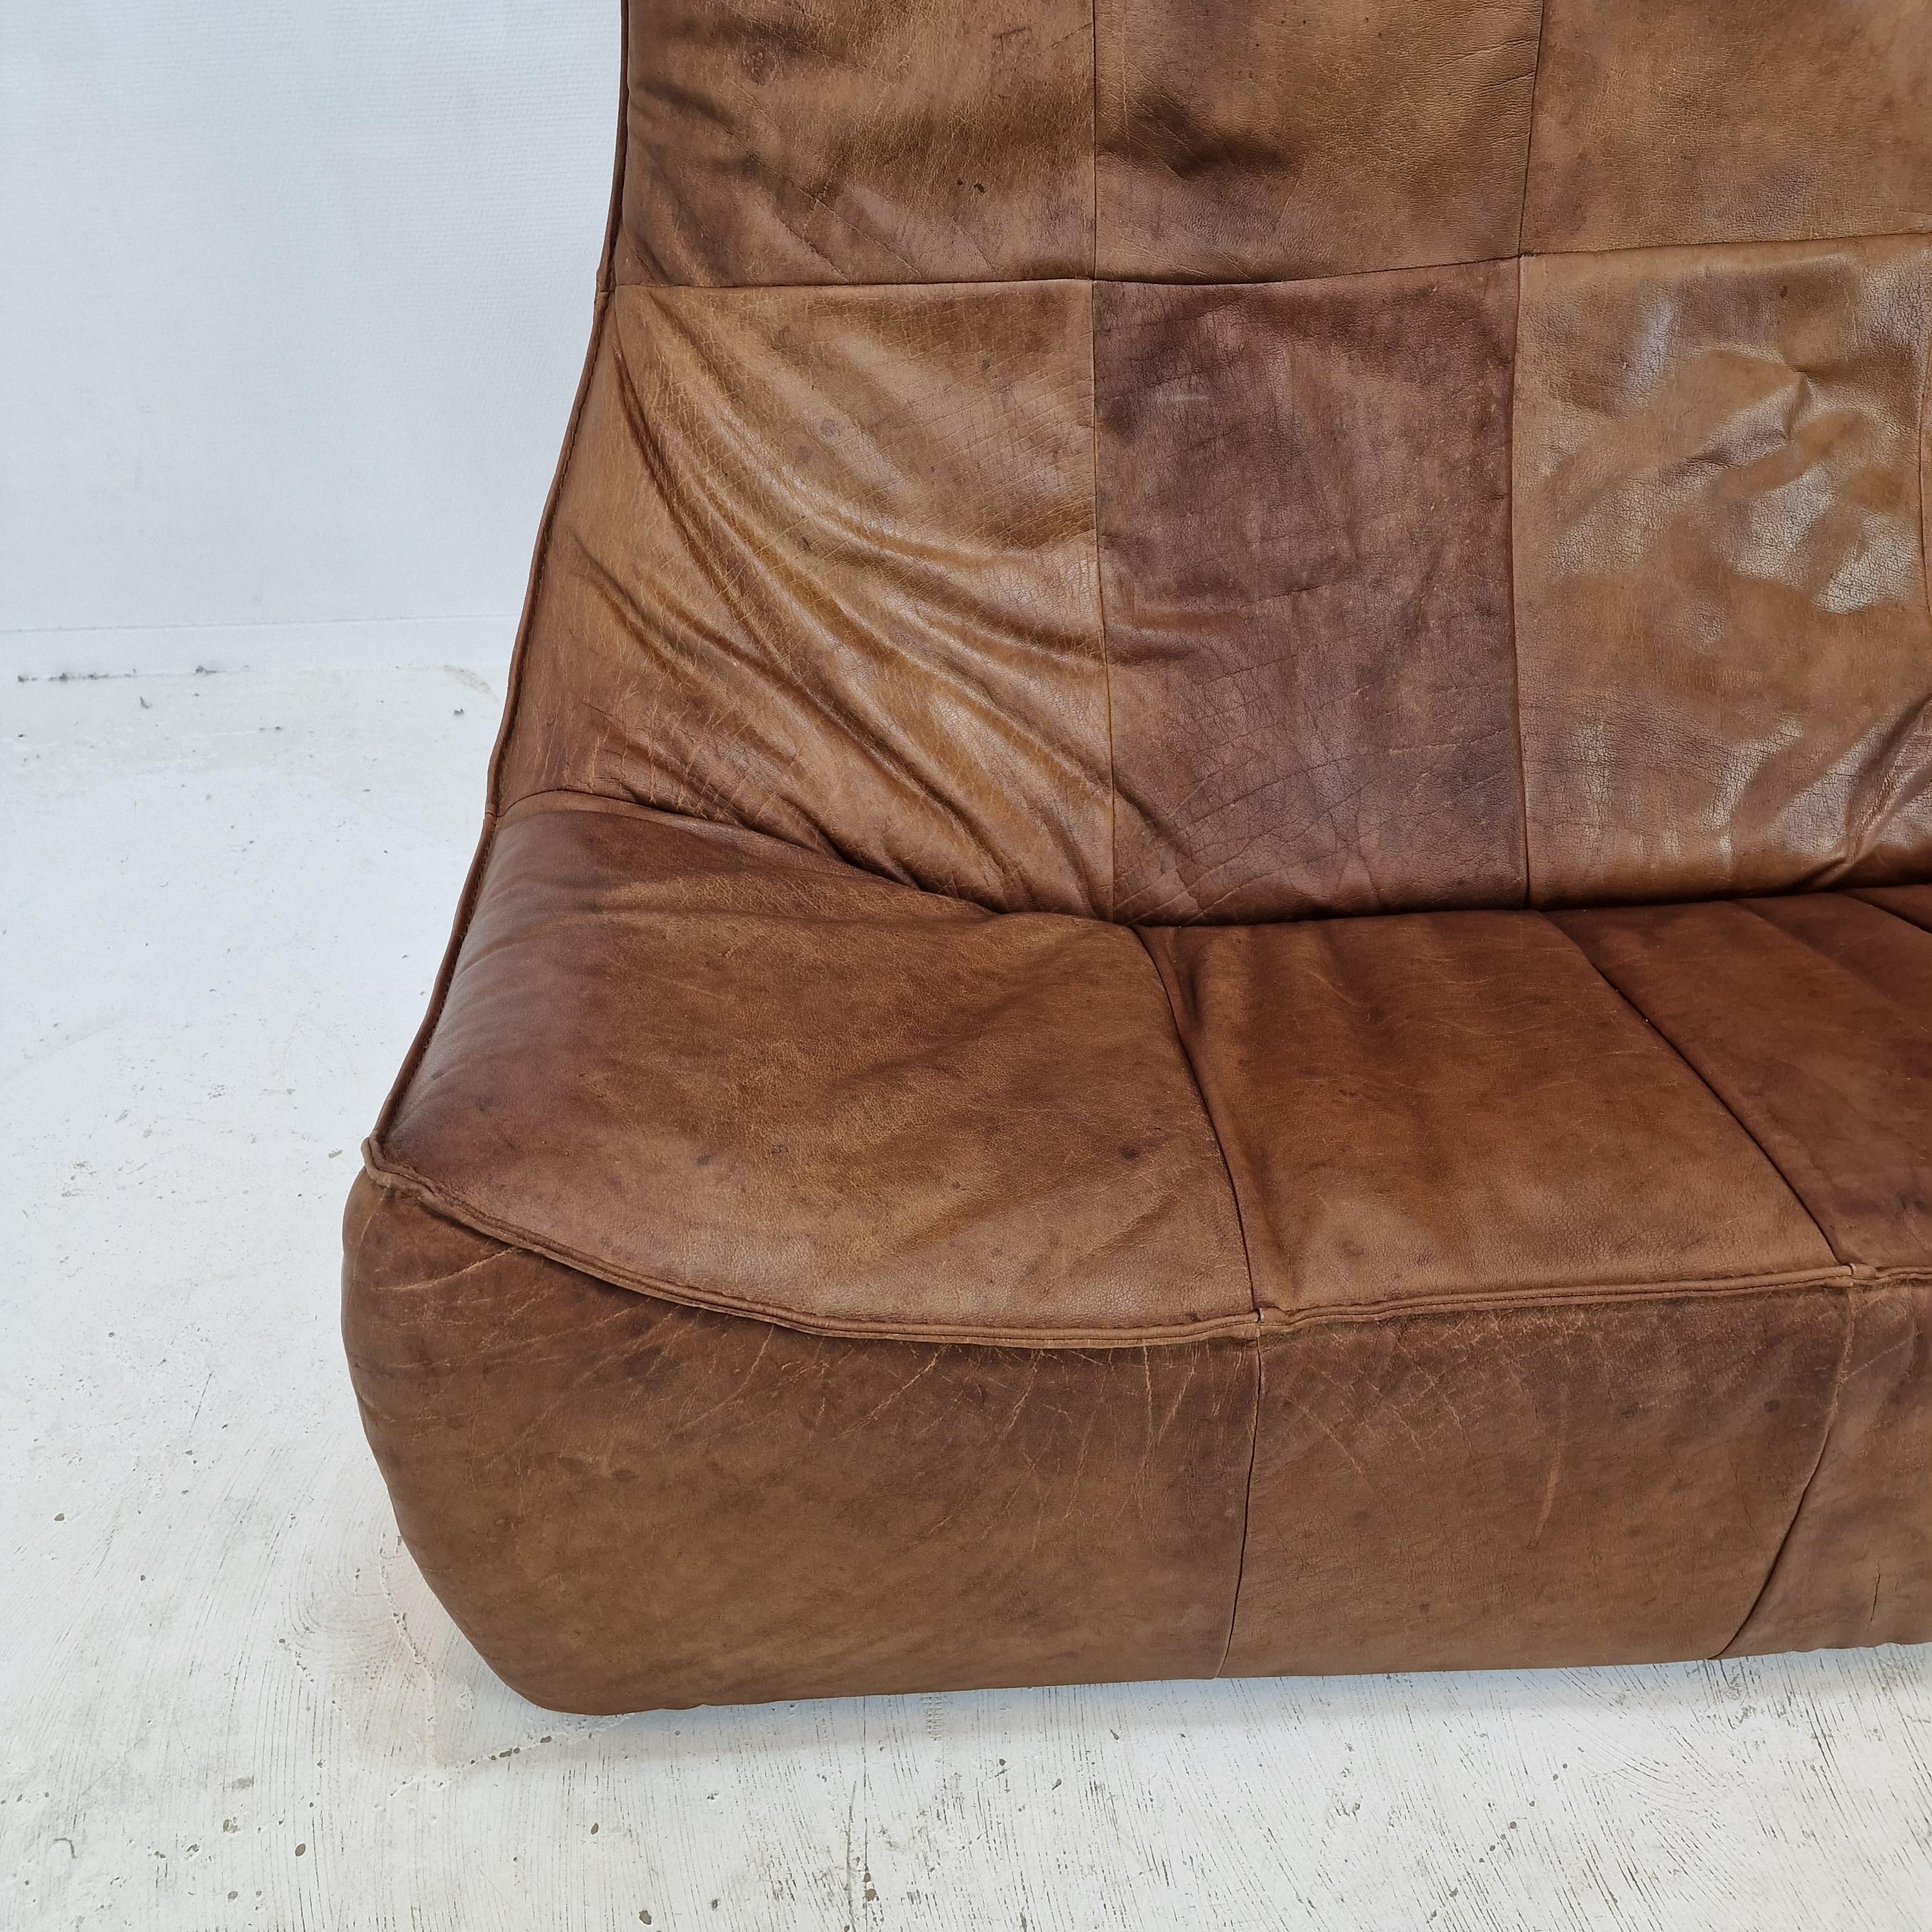 Montis “The Rock” Sofa In Brown Leather By Gerard Van Den Berg, 1970s For Sale 11